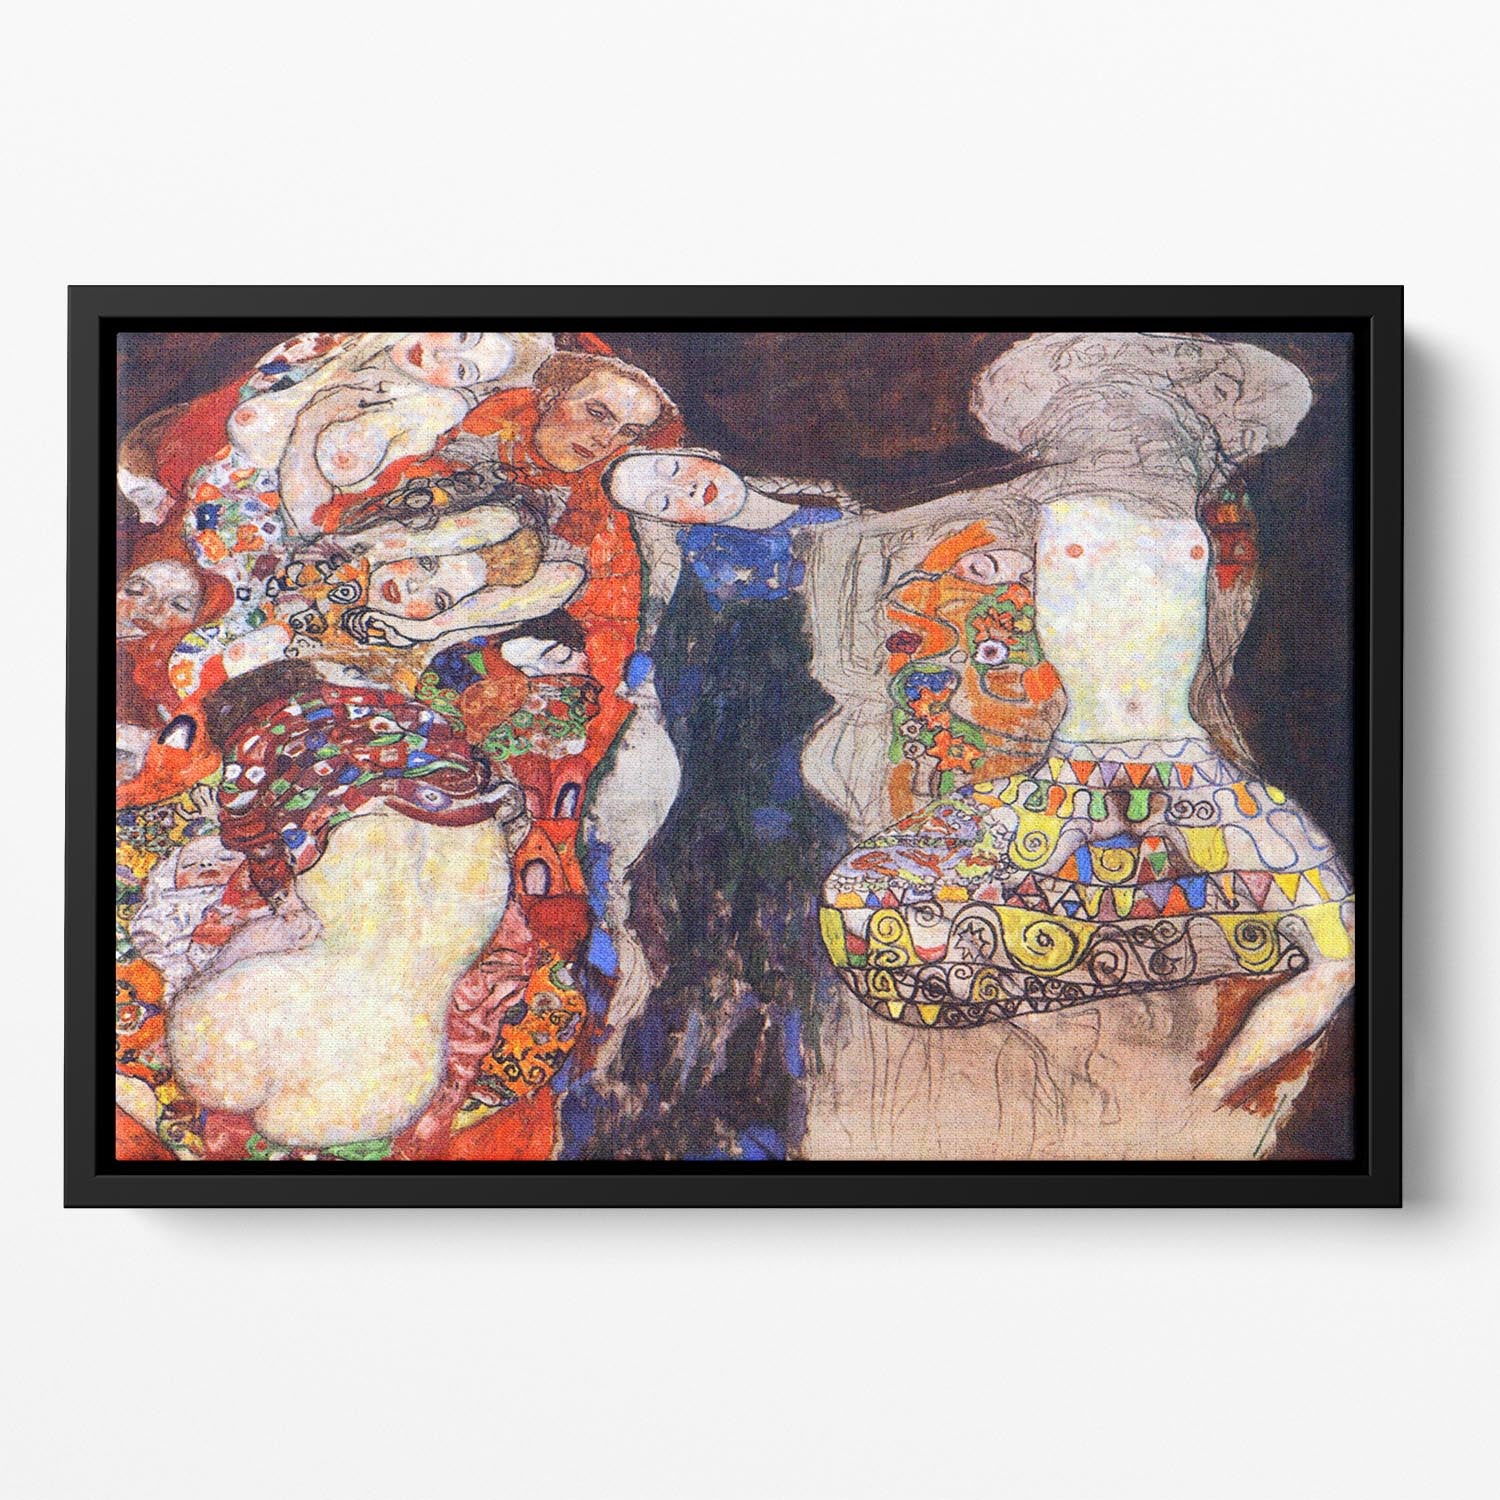 adorn the bride with veil and wreath by Klimt Floating Framed Canvas